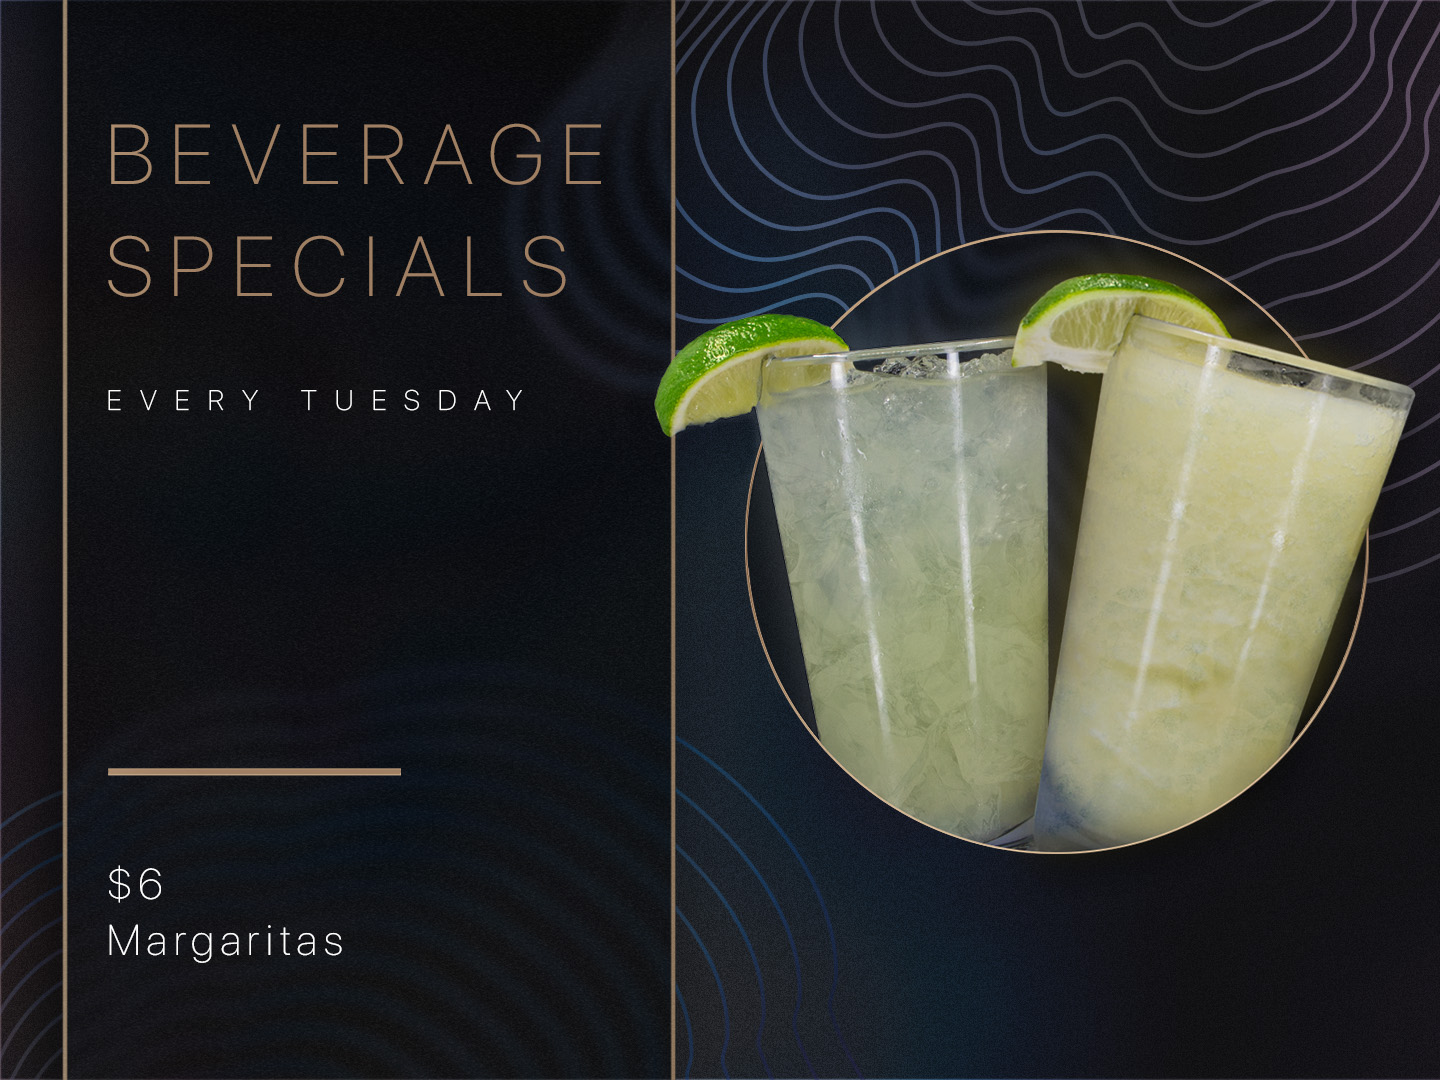 Beverage Specials. Every Tuesday. $6 Margaritas